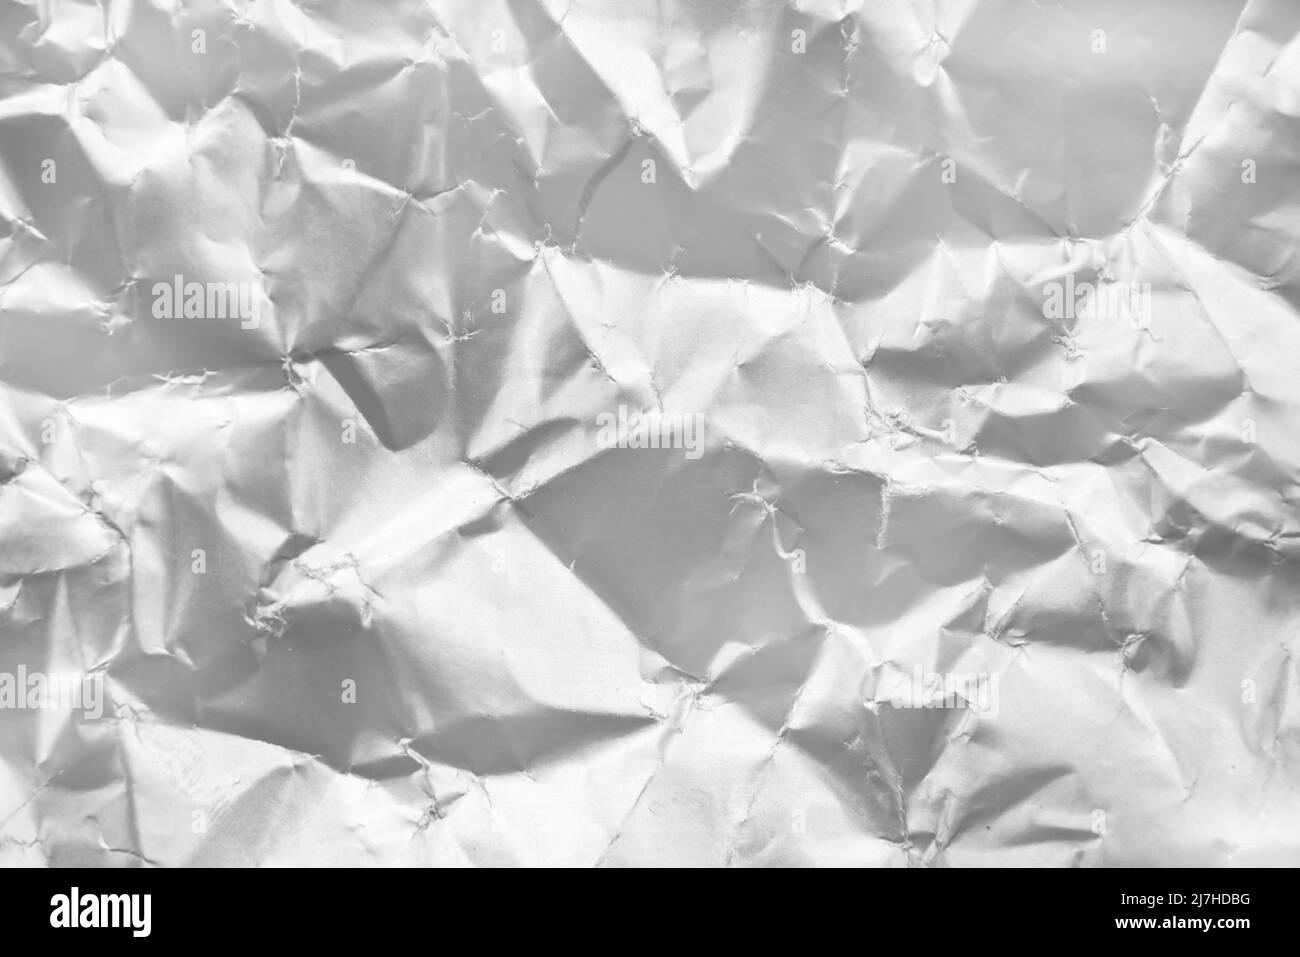 Background from crumpled paper in silver color. Paper with scuffs and waves Stock Photo